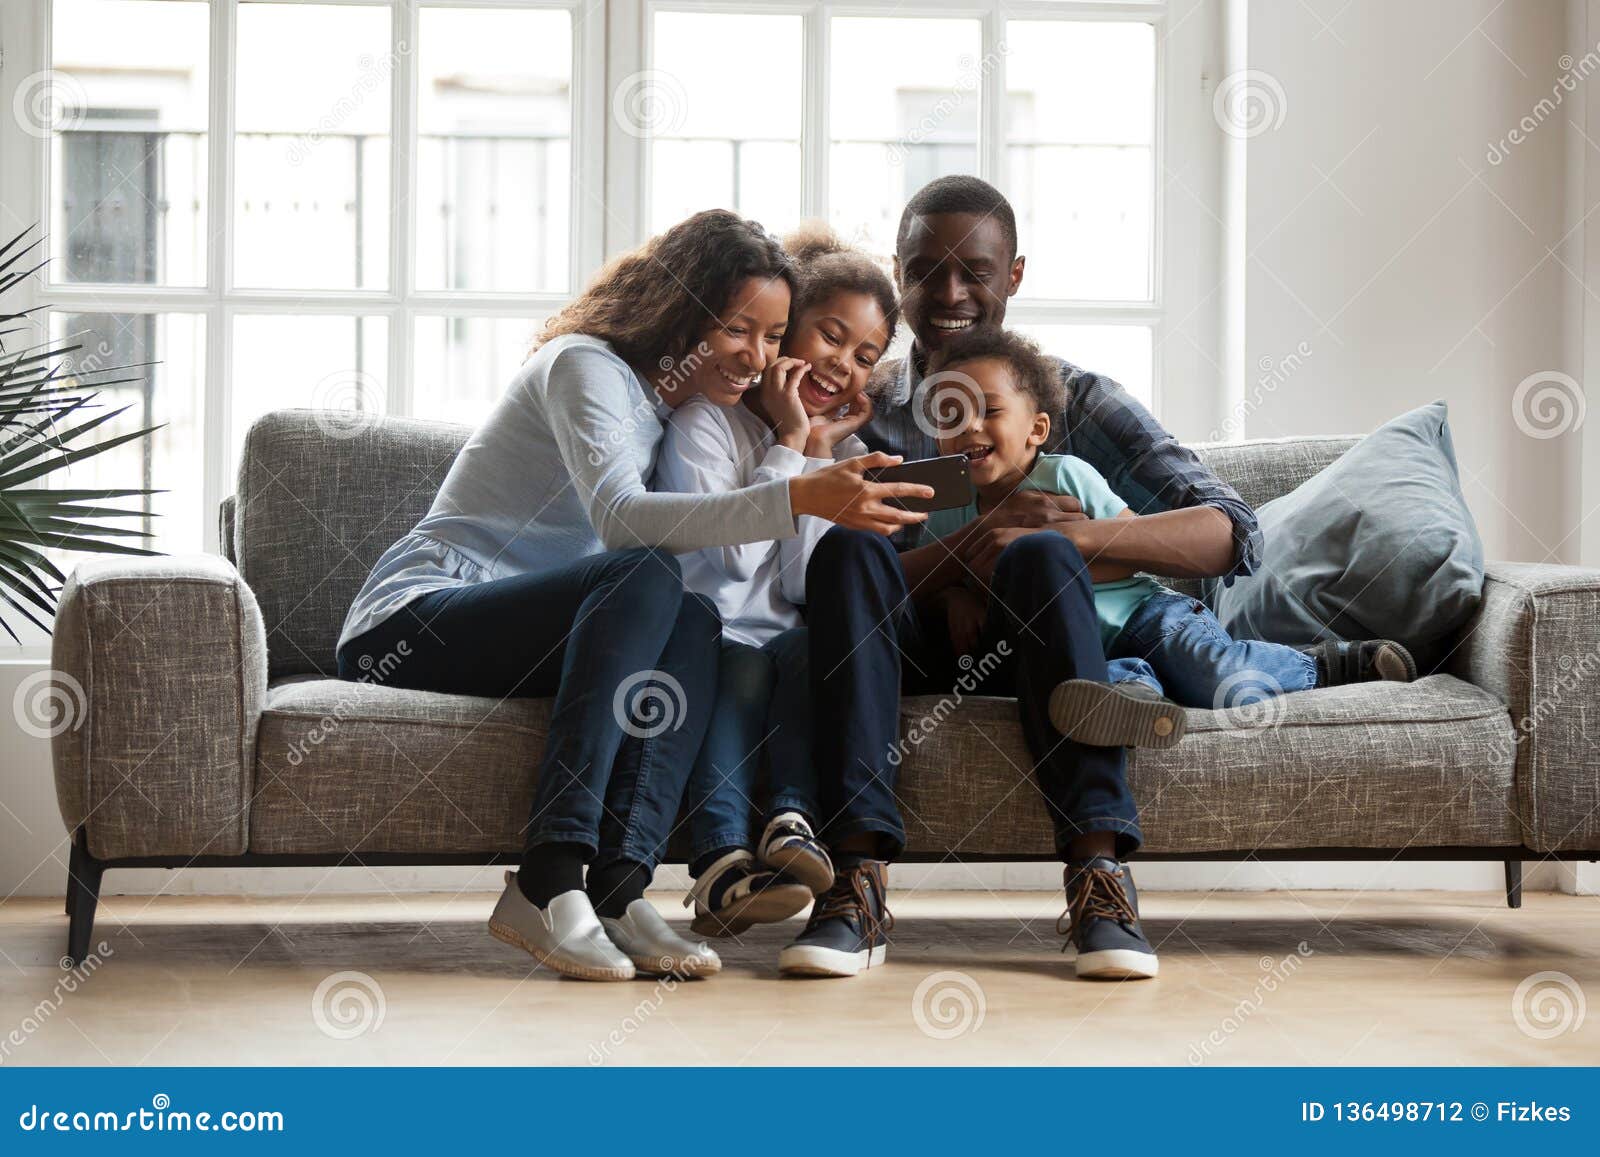 happy african family with 2 children having fun with gadget